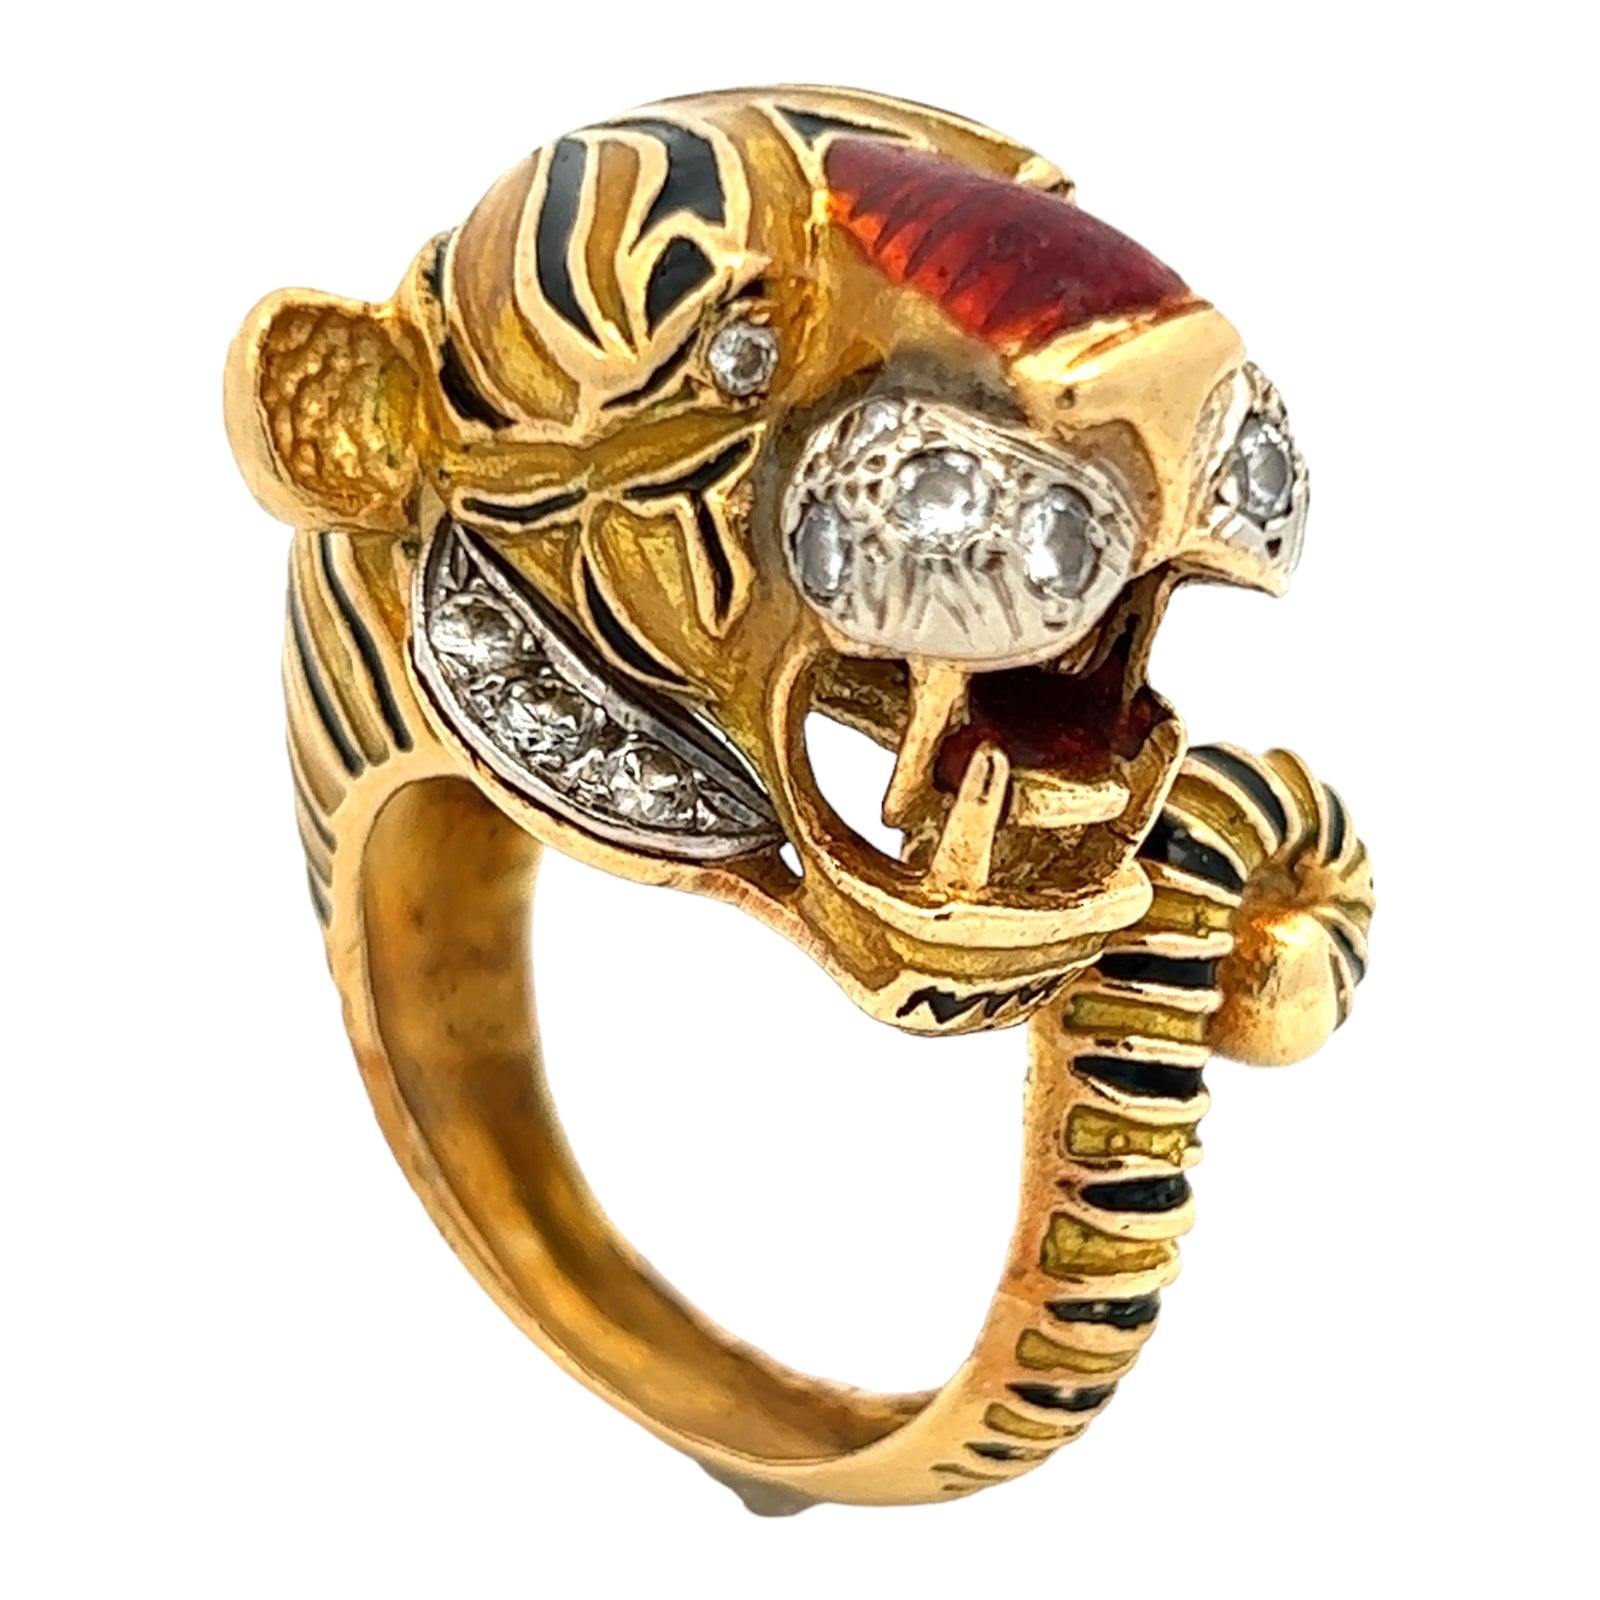 Tiger ring | Gold ring designs, Gents gold ring, Rings for men